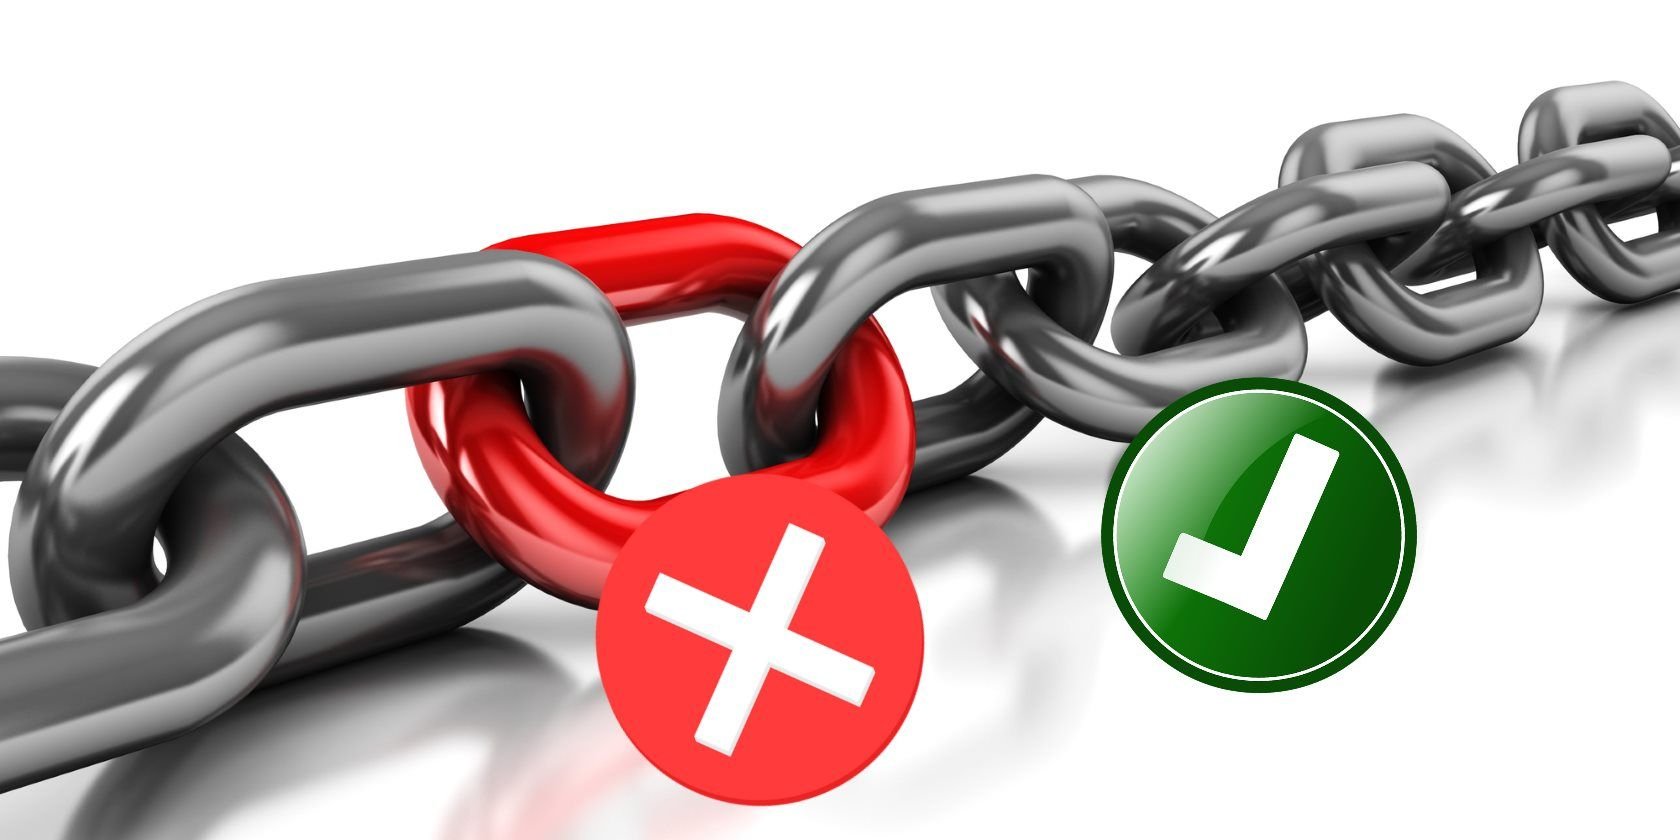 7 Quick Sites That Let You Check If a Link Is Safe